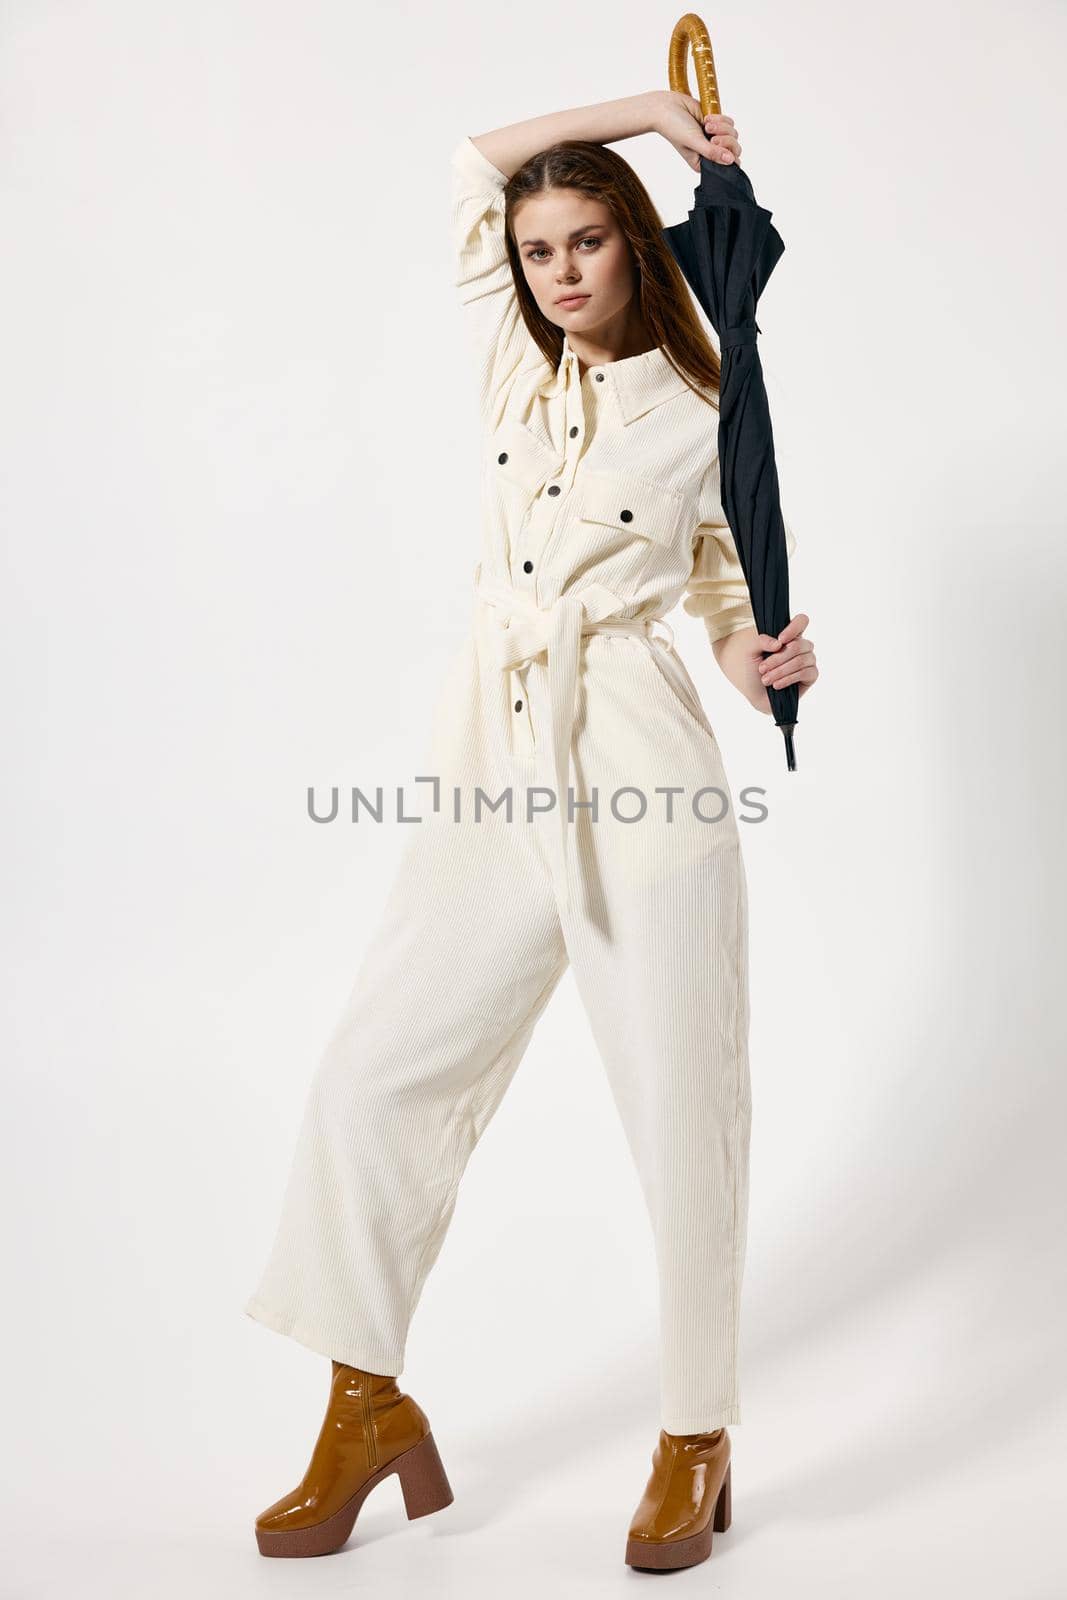 pretty woman in suit umbrella in hands protection from rain modern style. High quality photo